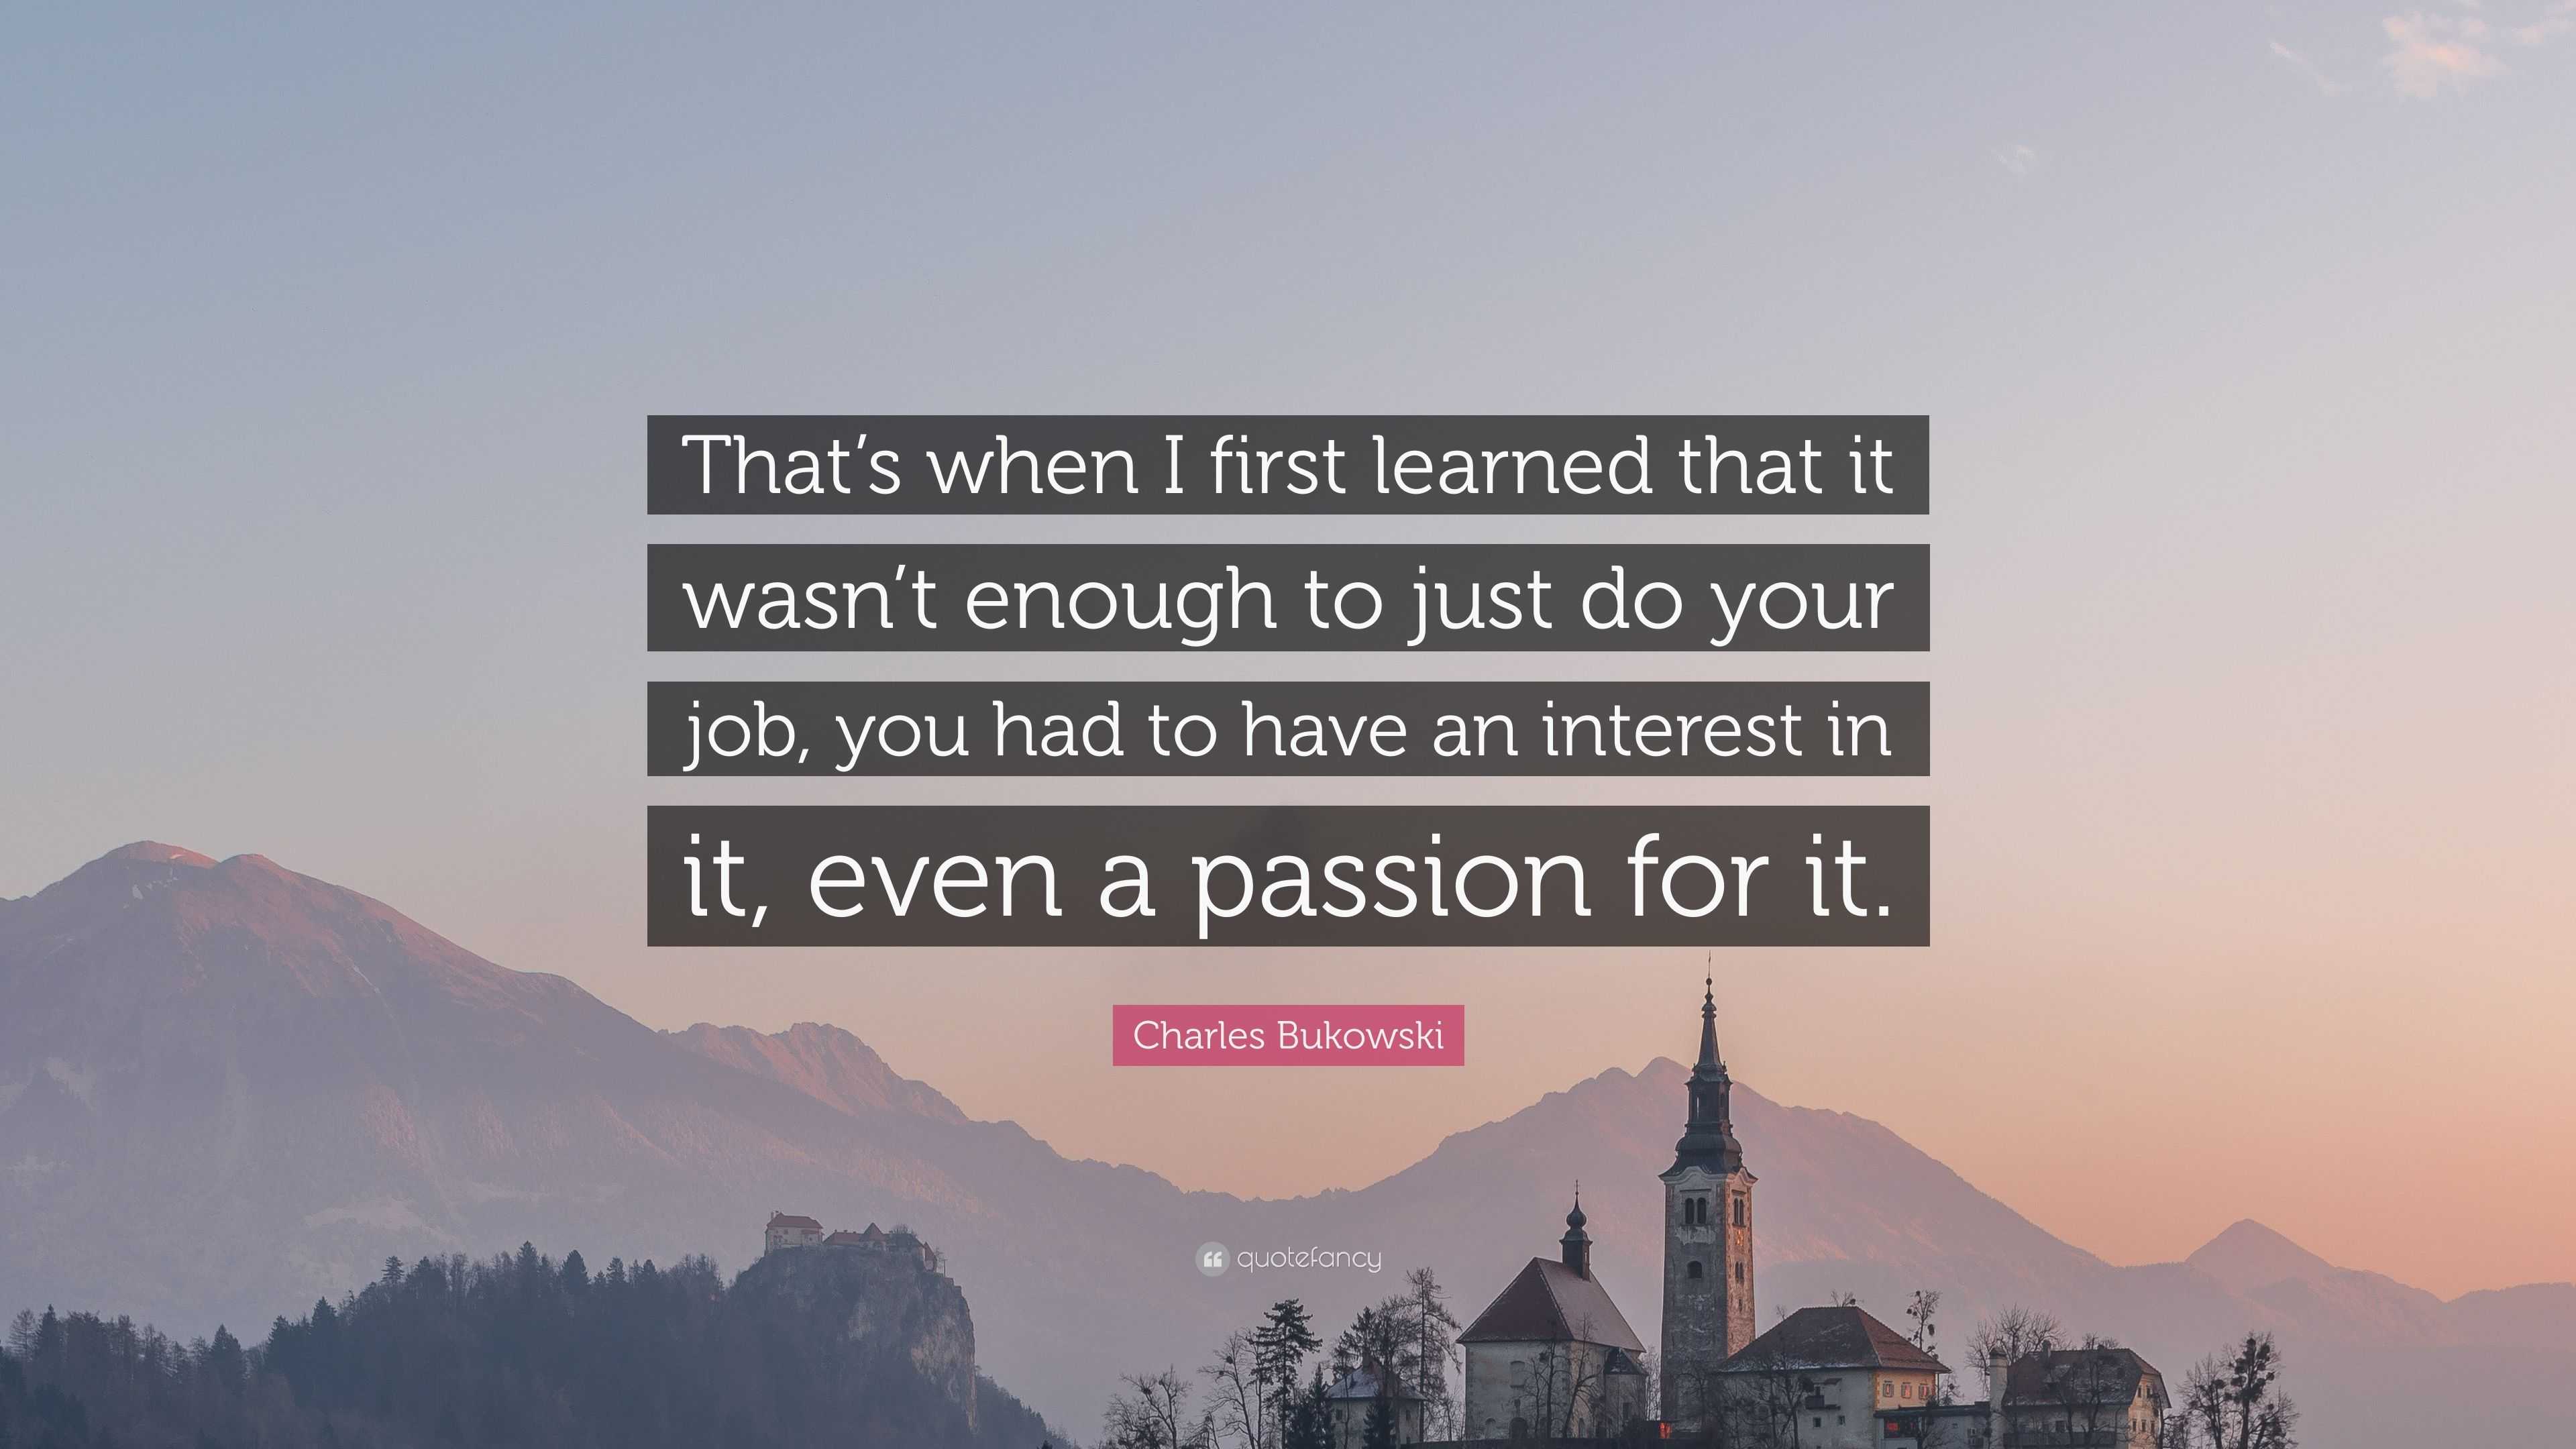 Charles Bukowski Quote: “That's when I first learned that it wasn't enough  to just do your job, you had to have an interest in it, even a passion”